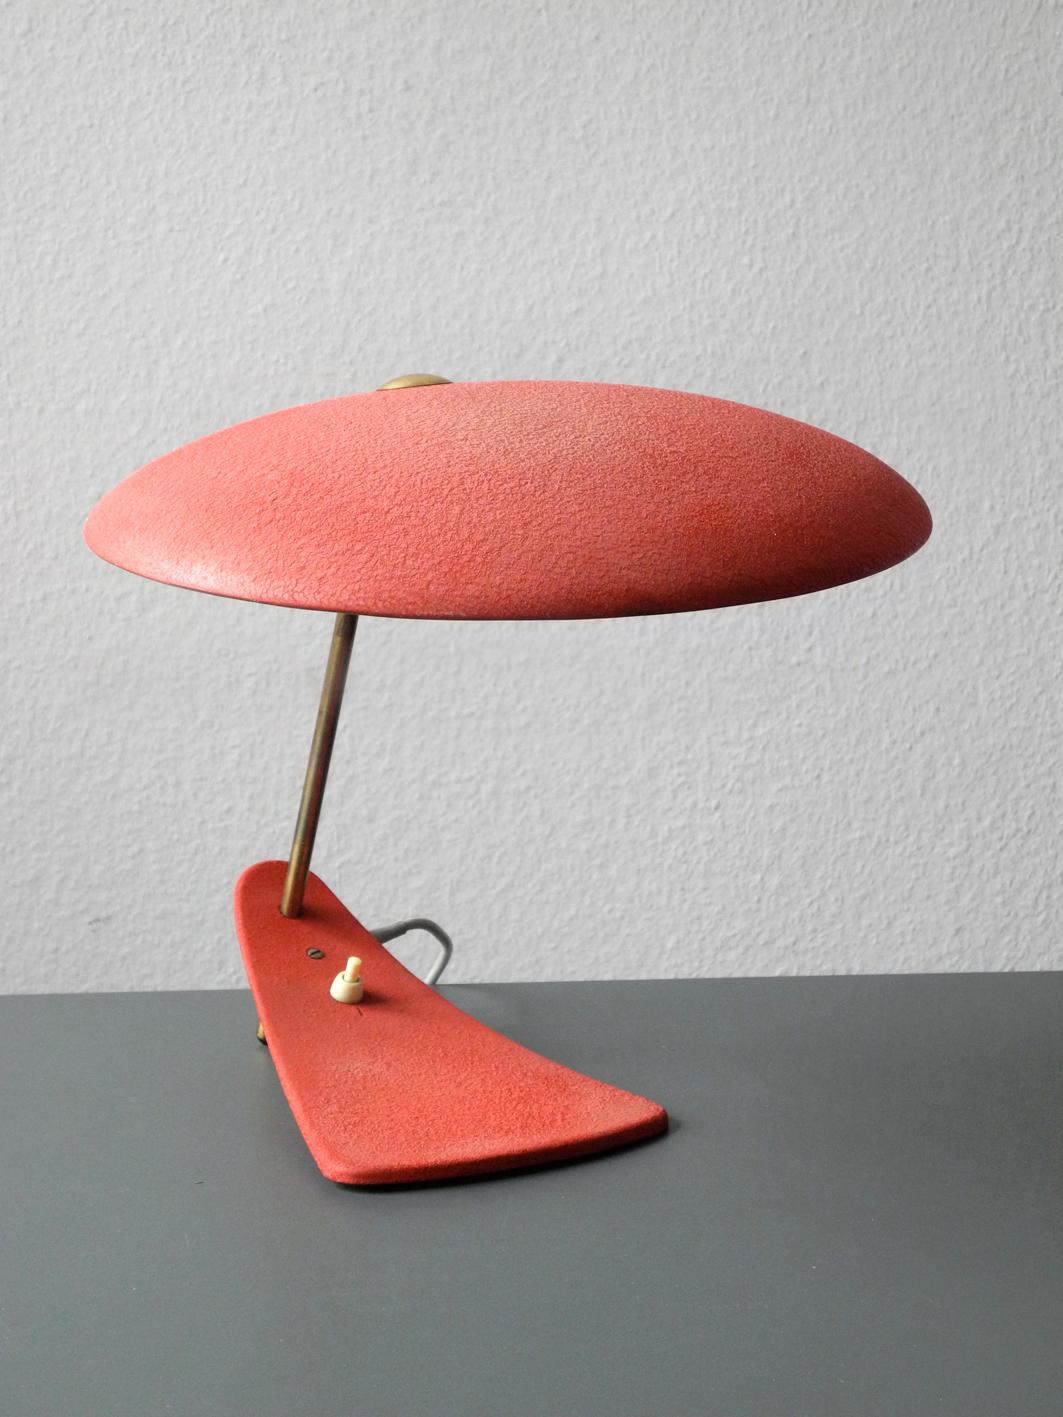 Italian Mid-Century Modernist Table Lamp with Red Shrink Varnish 3